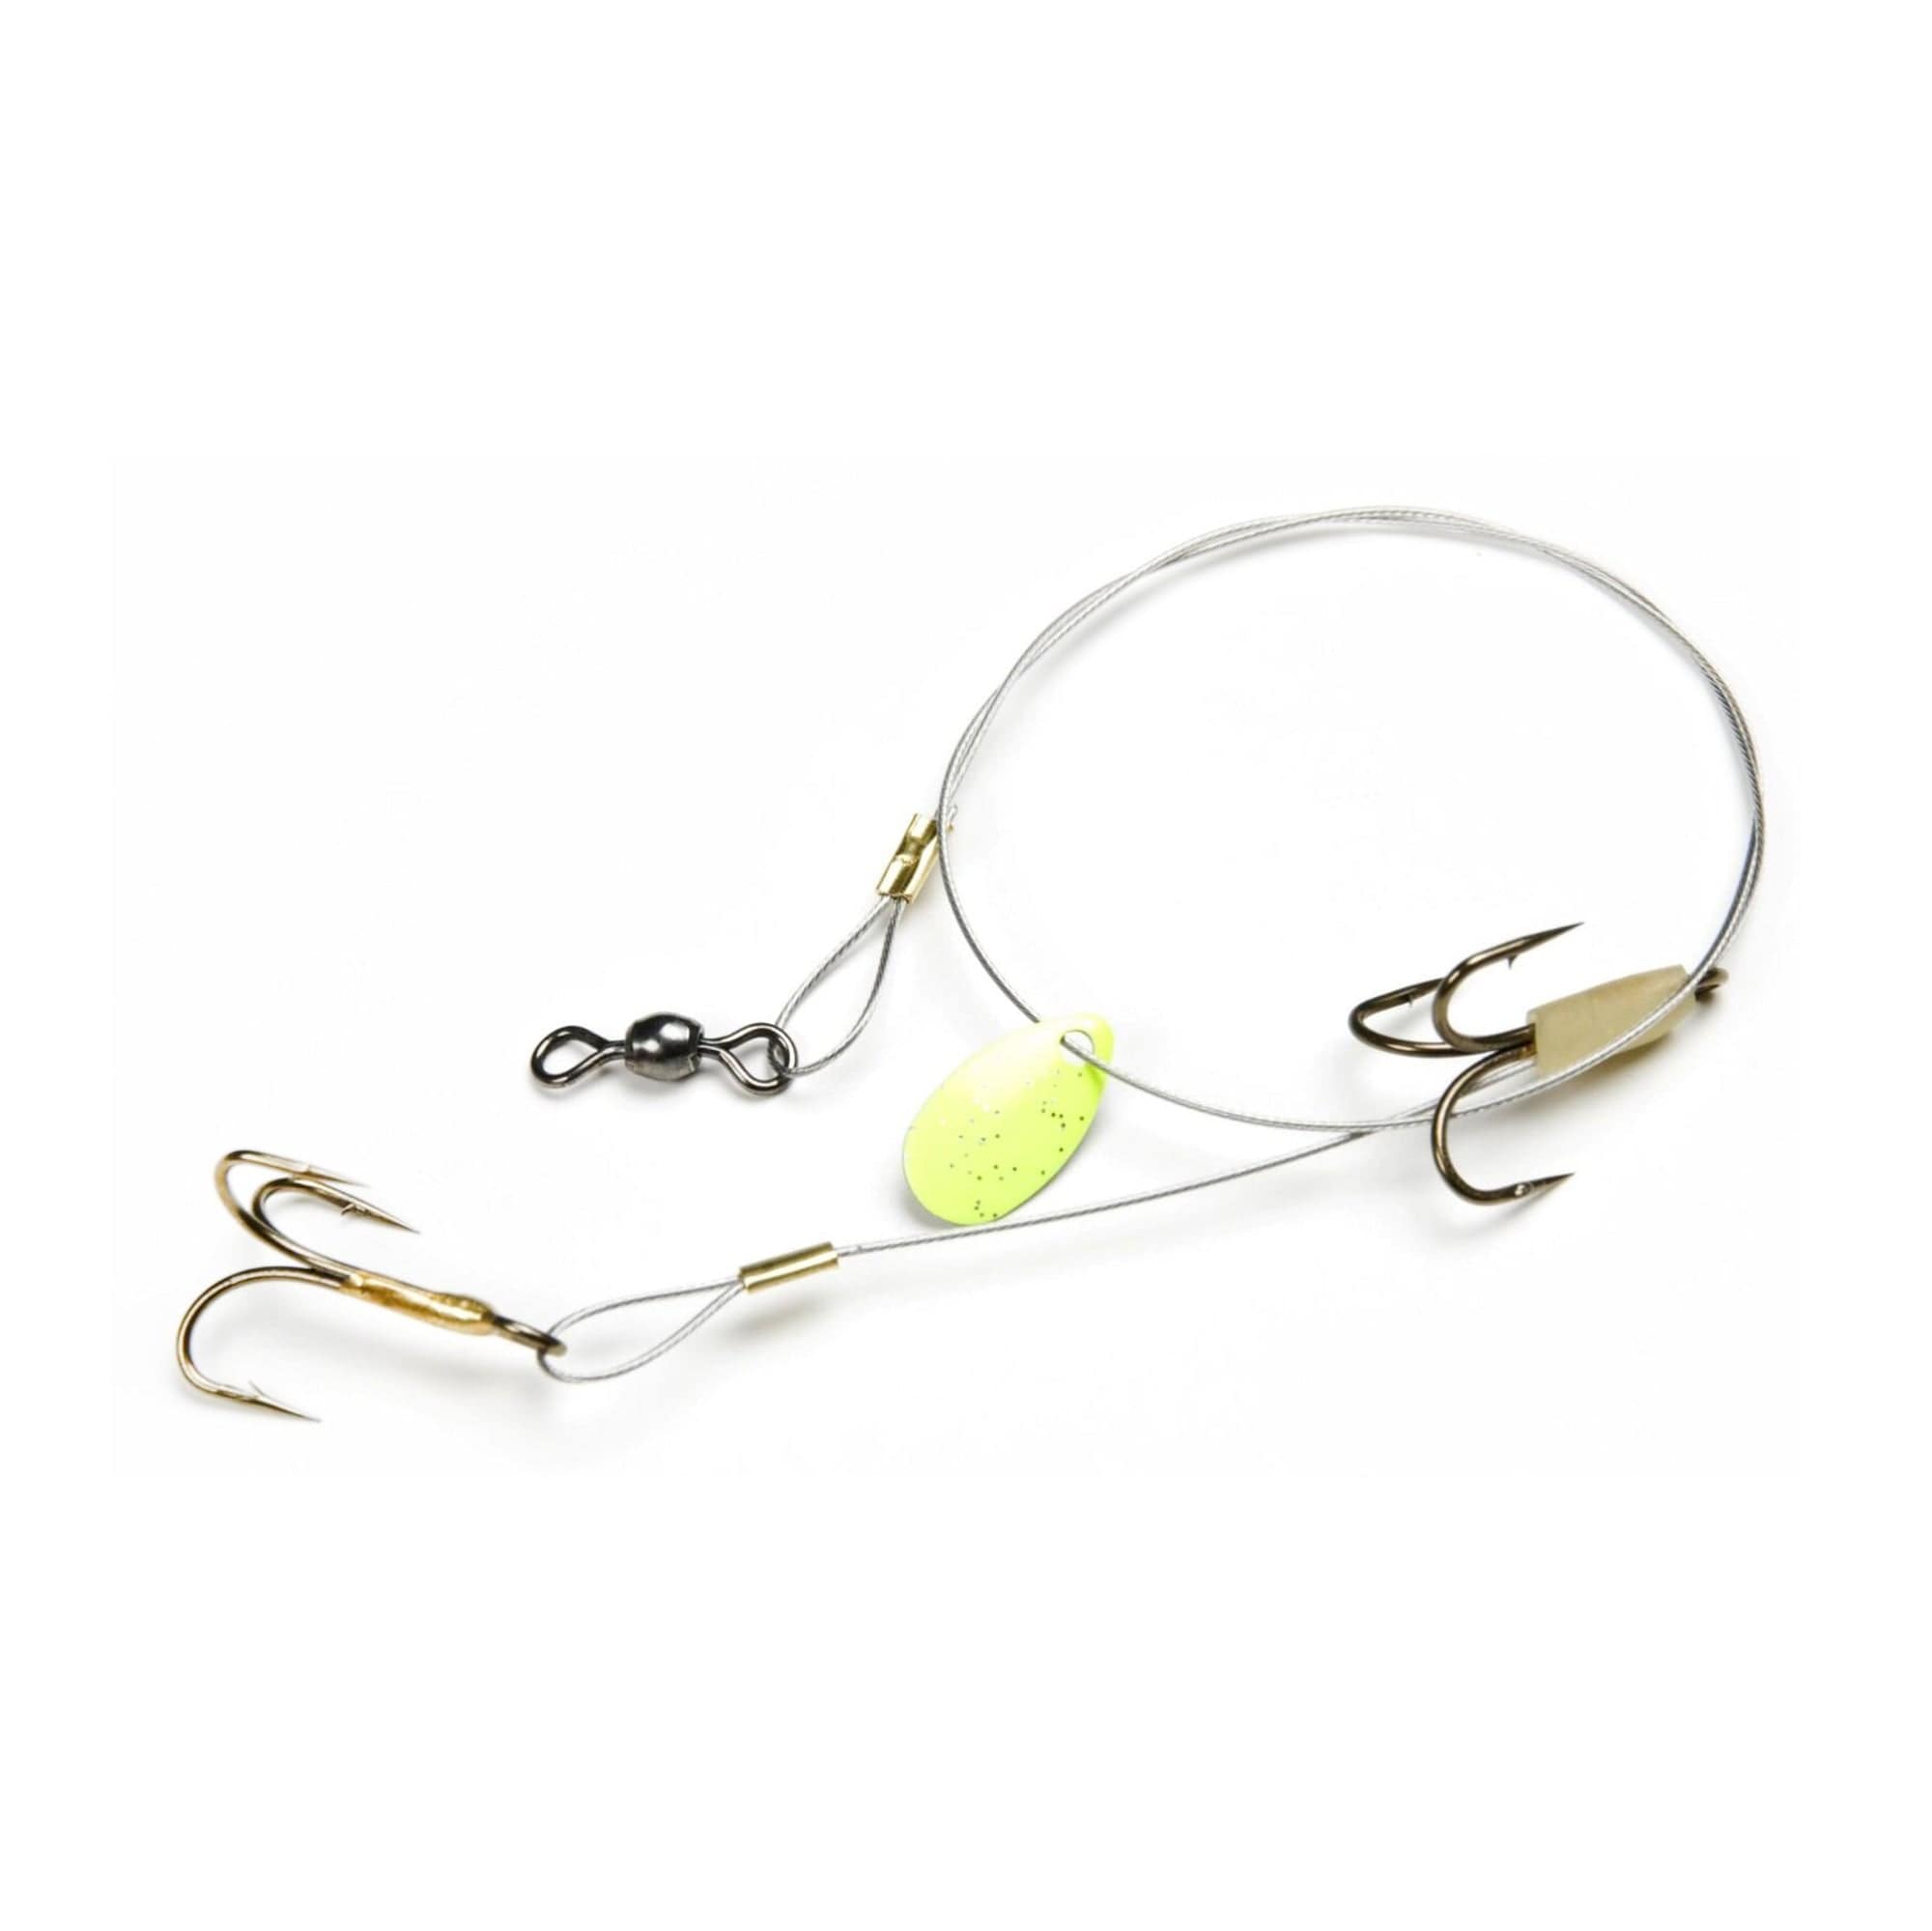 Celsius CE-QUICKRG-4 Quickset Pike/Muskie Rig, Size 4